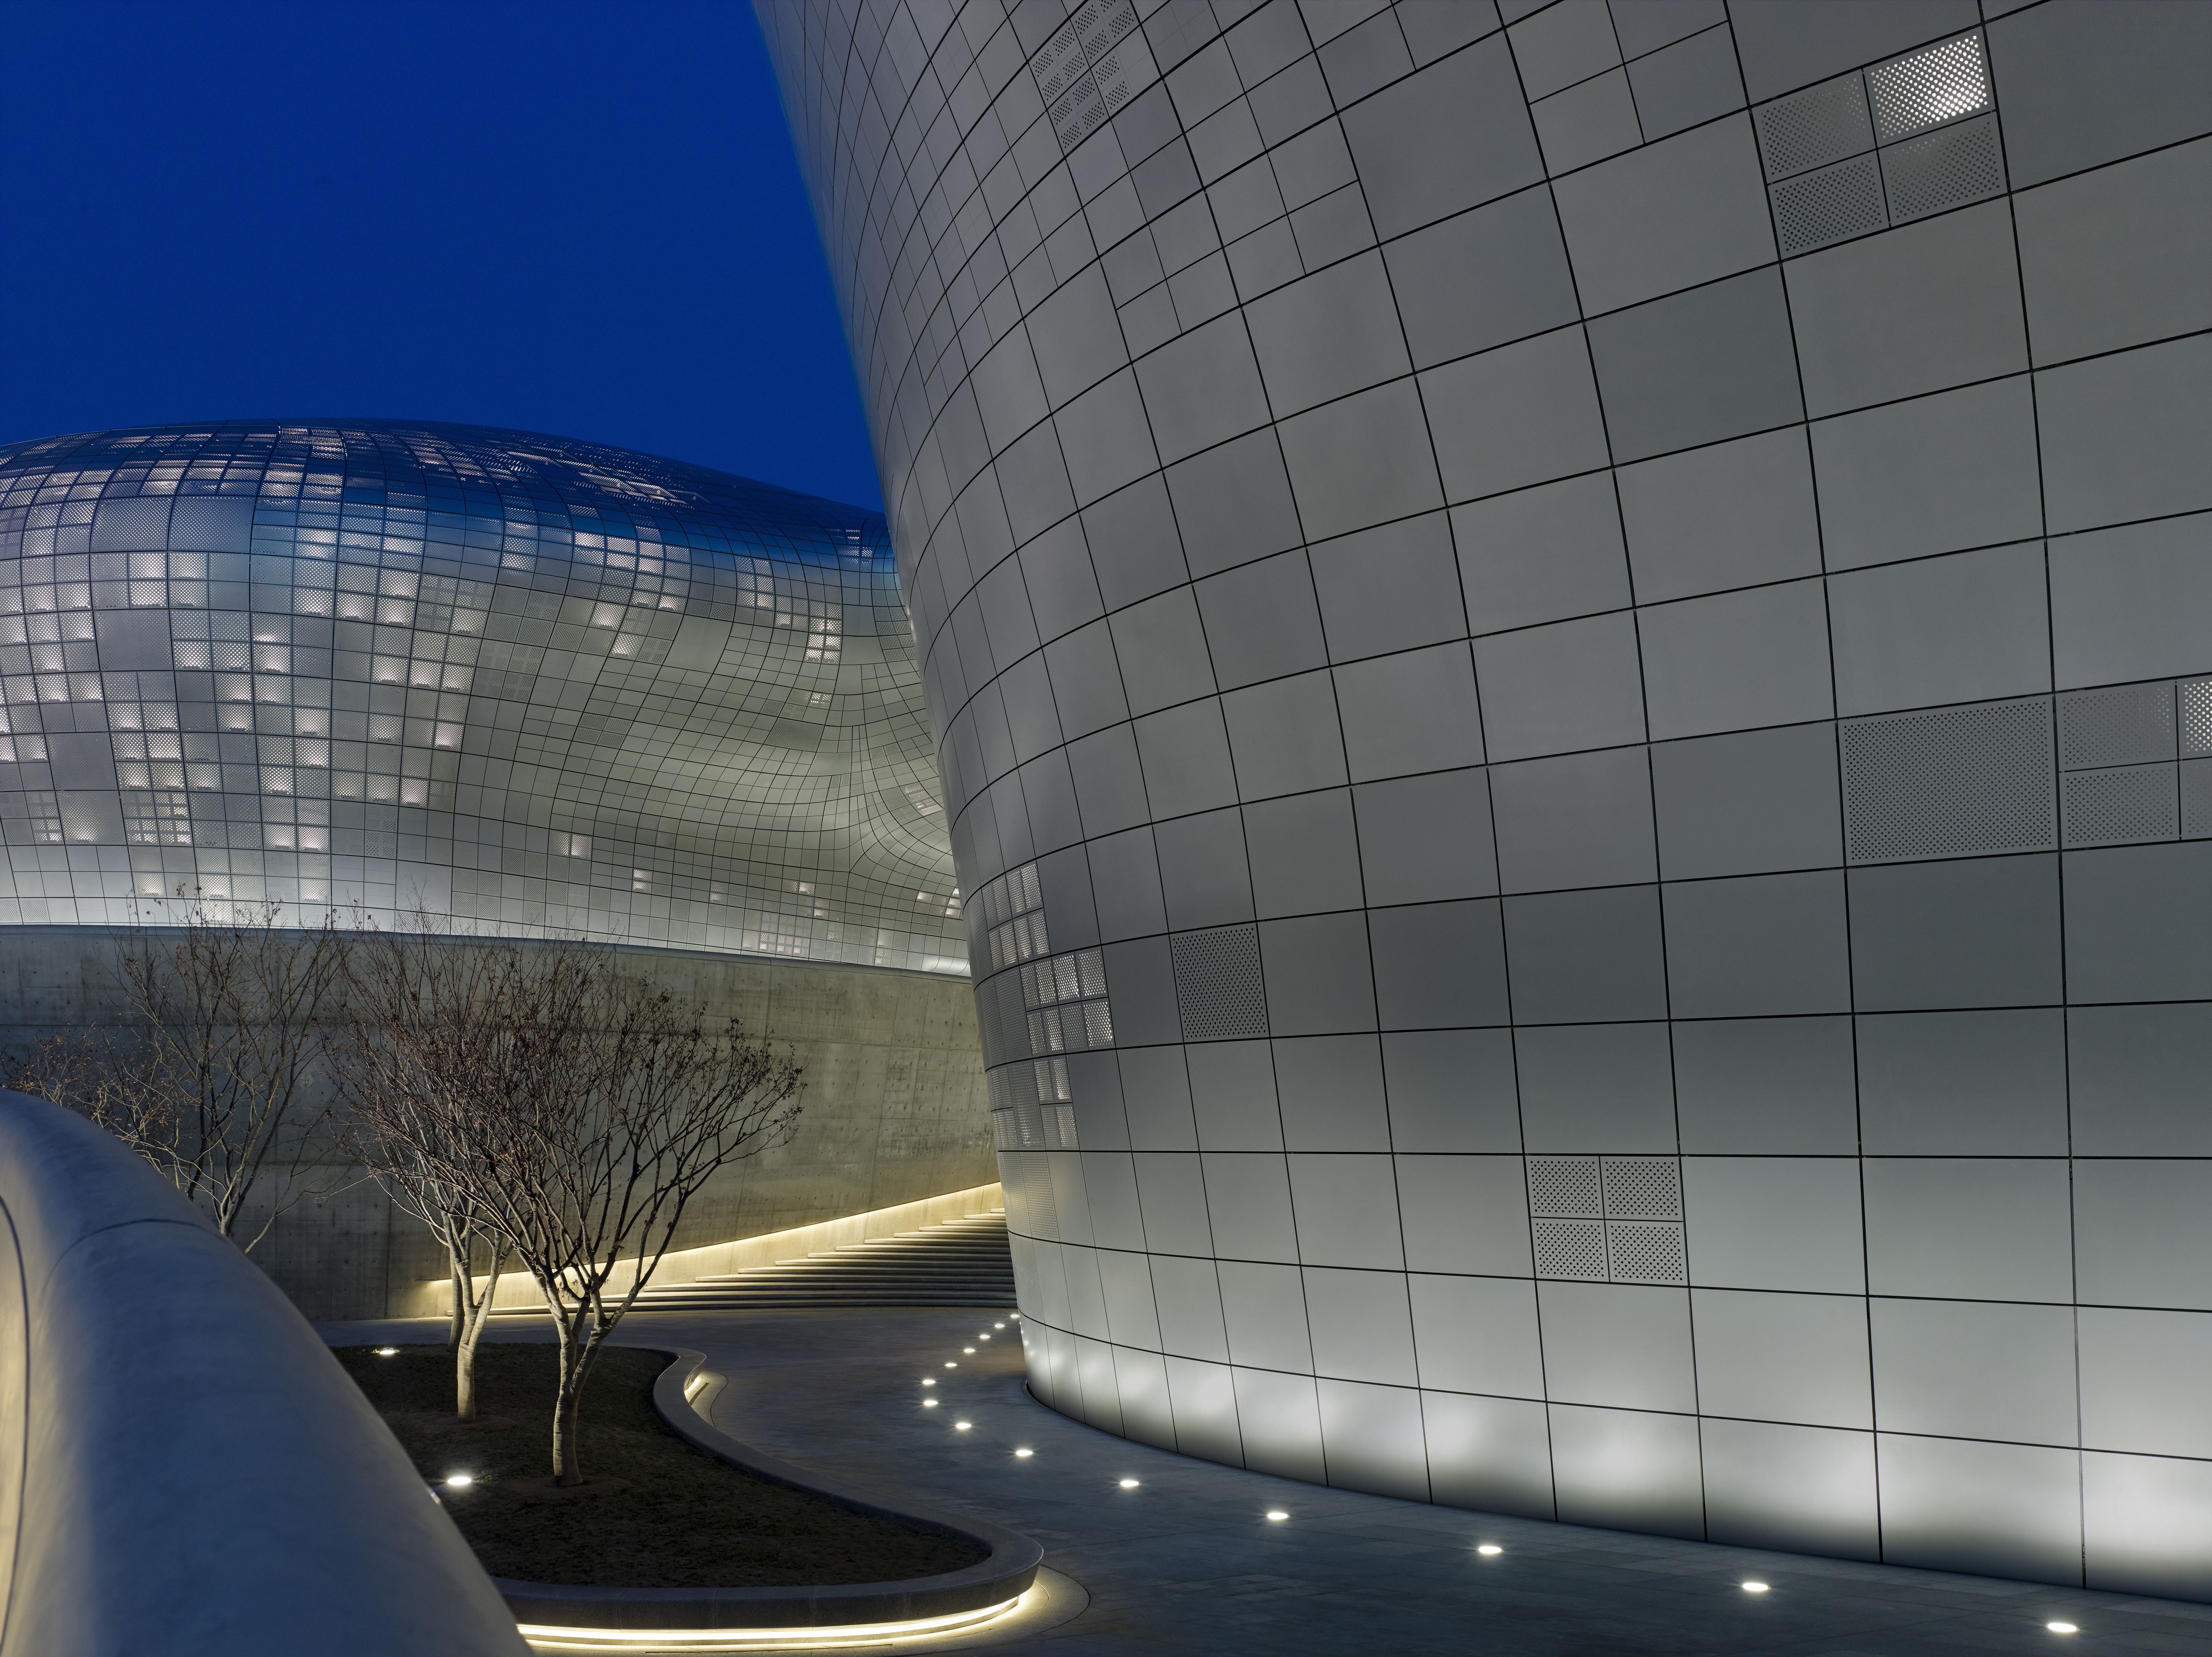 Hadid calls the plaza a "green oasis" in the midst of the urban Dongdaemun distr